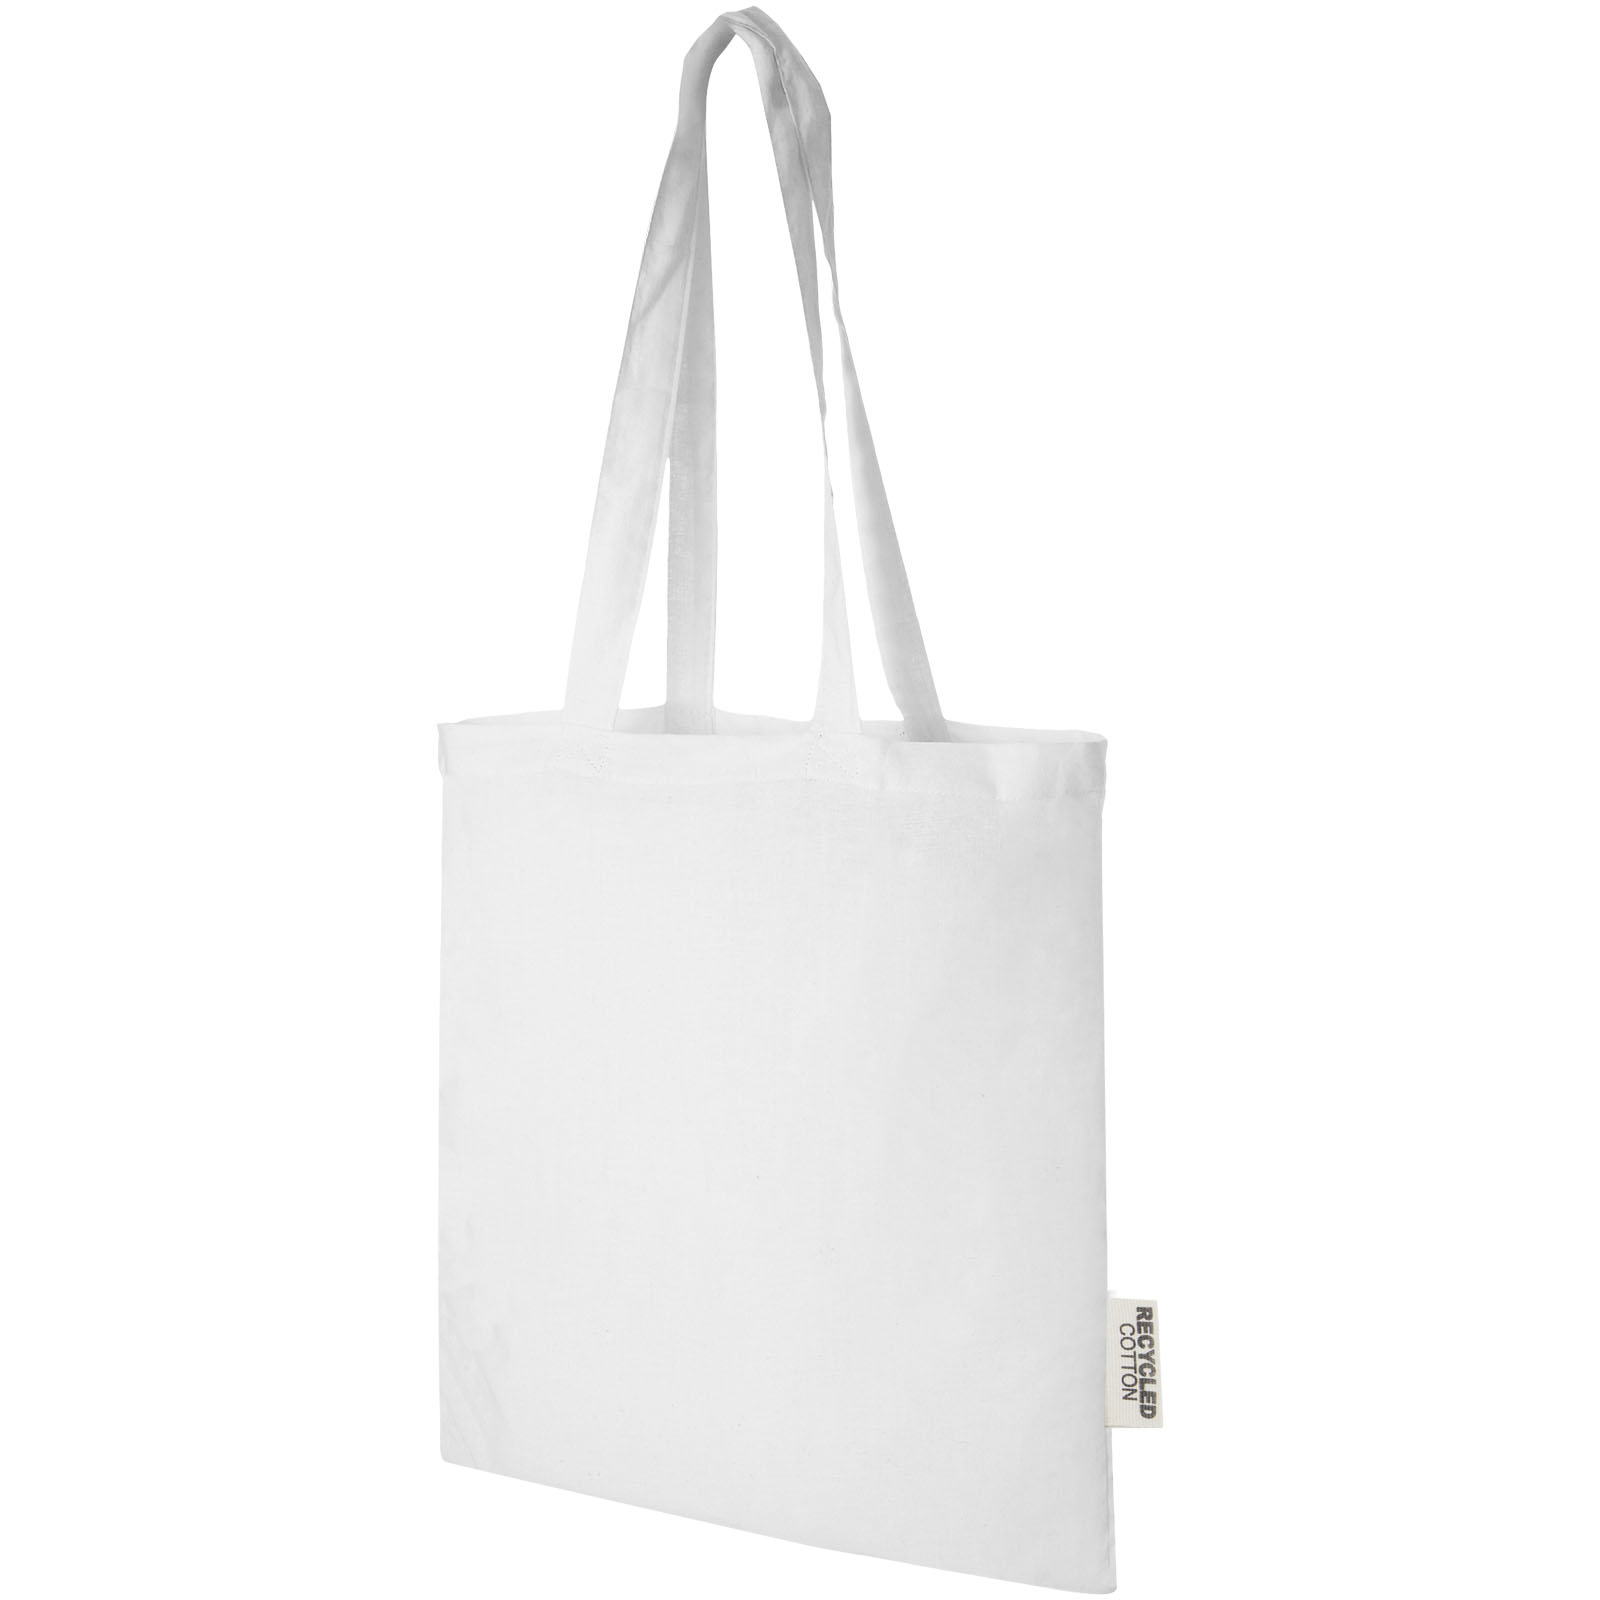 Advertising Shopping & Tote Bags - Madras 140 g/m2 GRS recycled cotton tote bag 7L